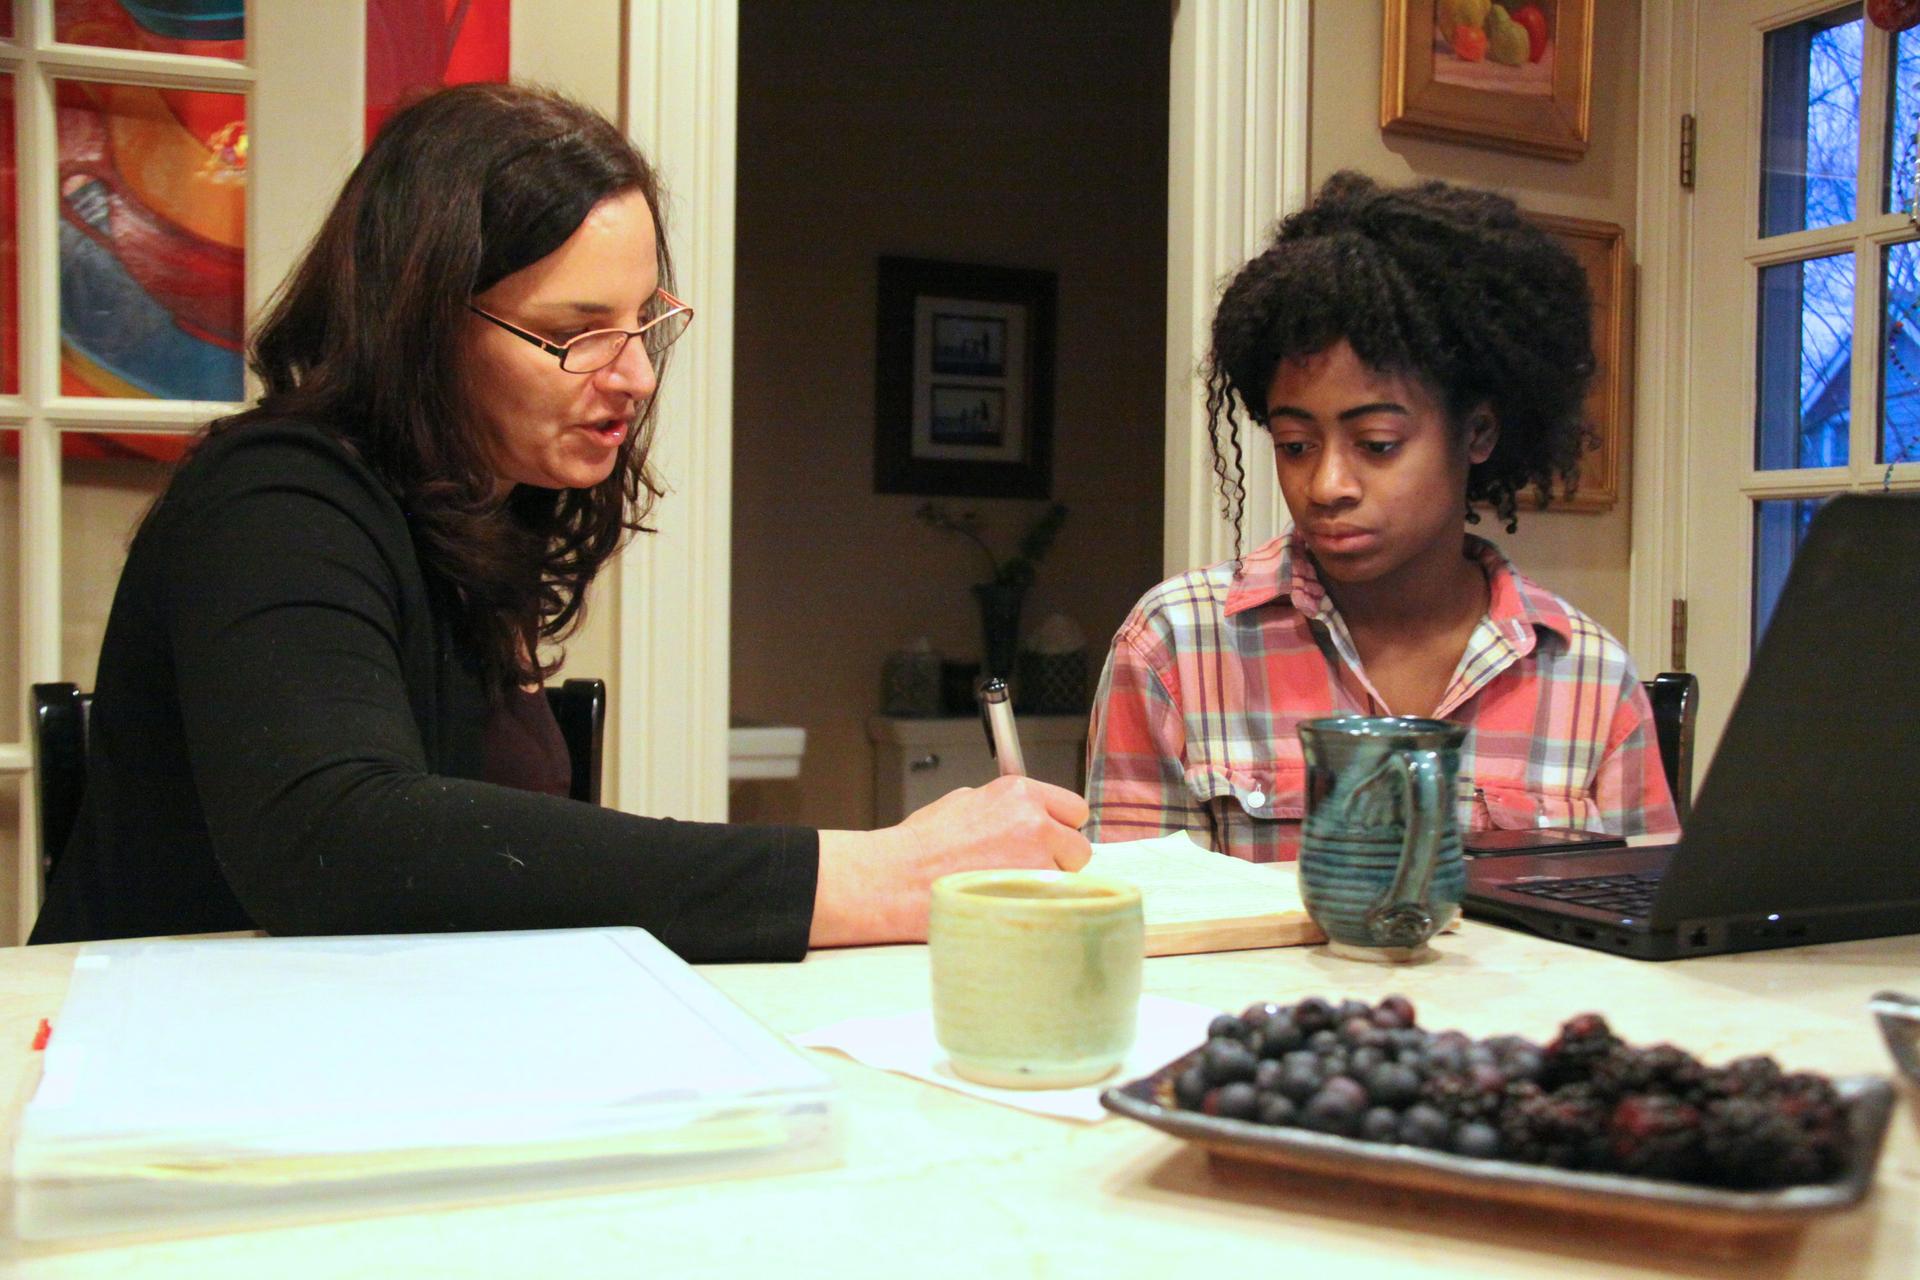 High school senior Mirabelle Espady and her mentor Marsha Kessler sit around the kitchen counter at Kessler’s home, reviewing Mirabelle’s college application.